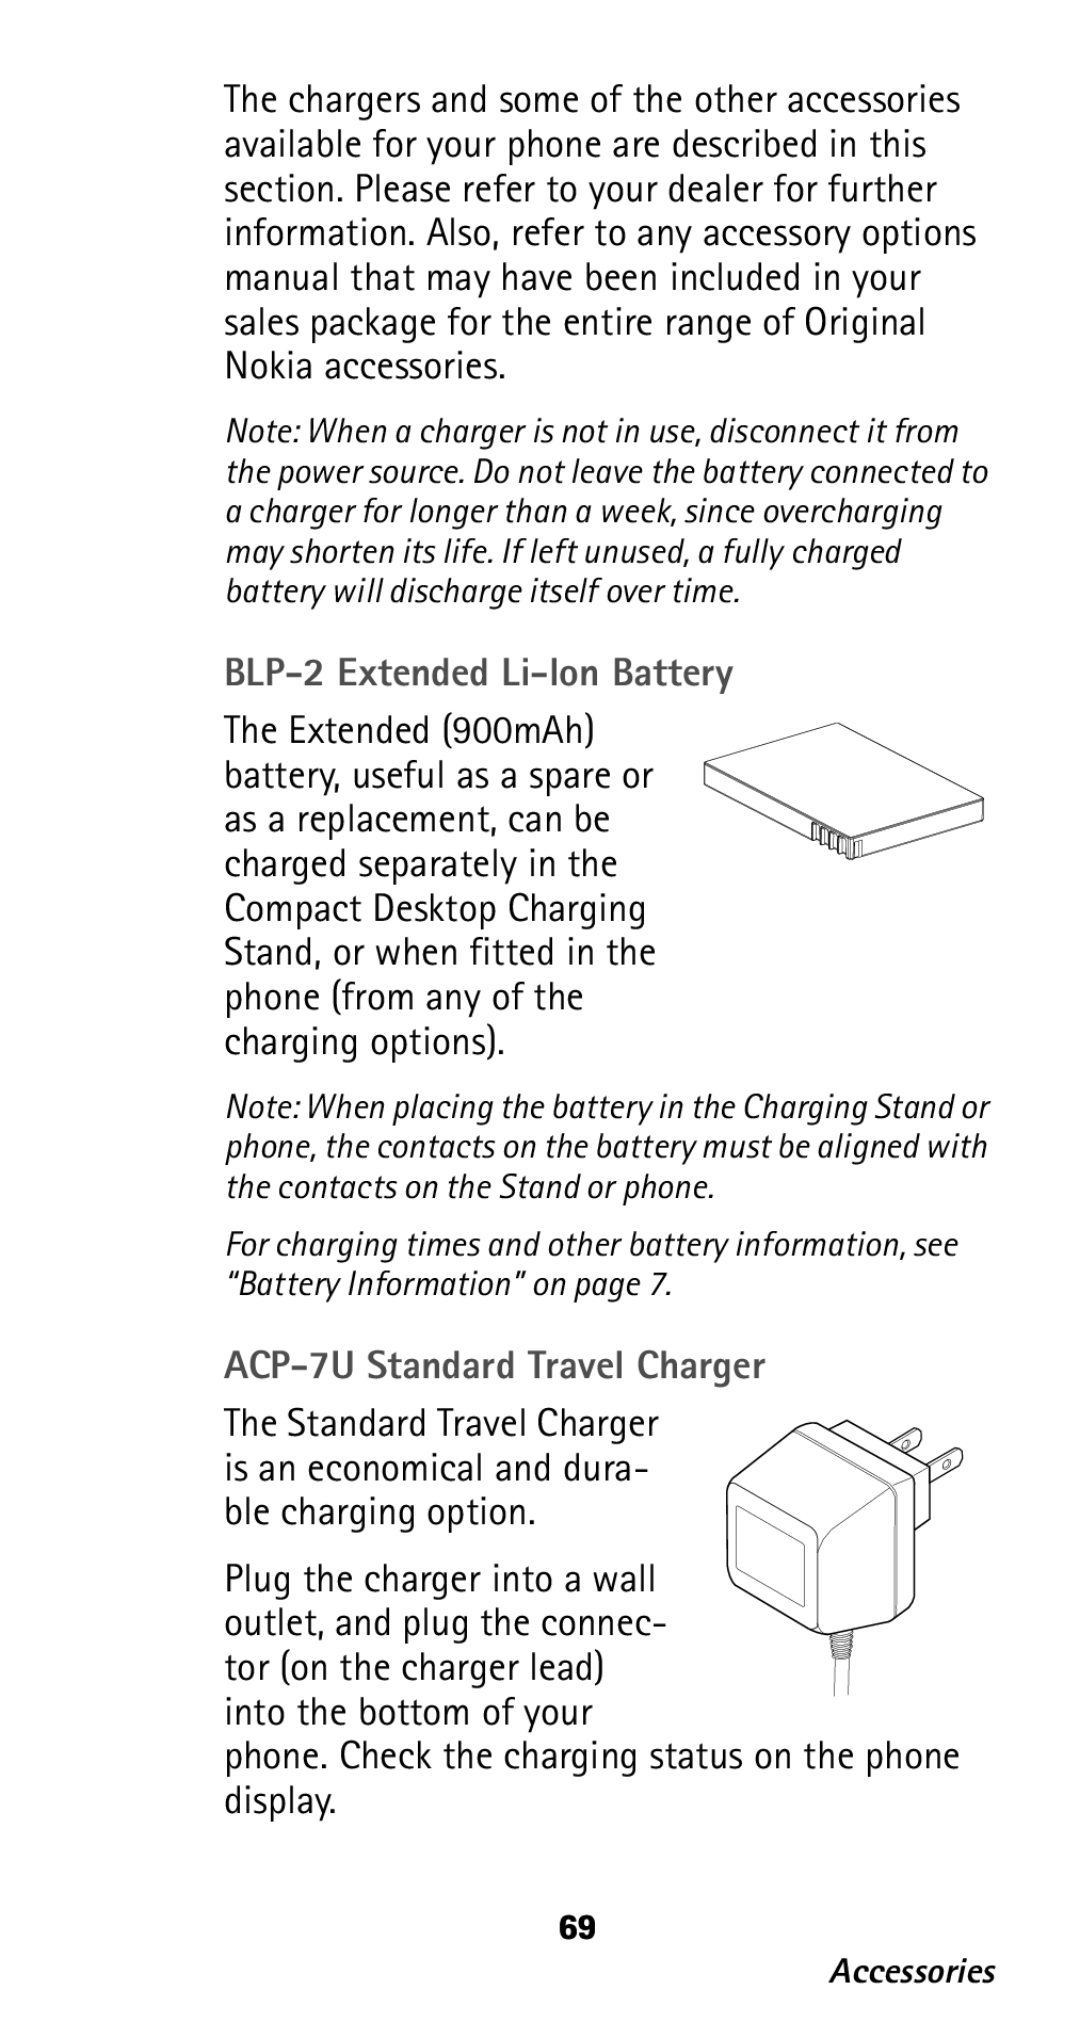 Nokia 282 owner manual BLP-2 Extended Li-Ion Battery, ACP-7U Standard Travel Charger, Plug the charger into a wall 